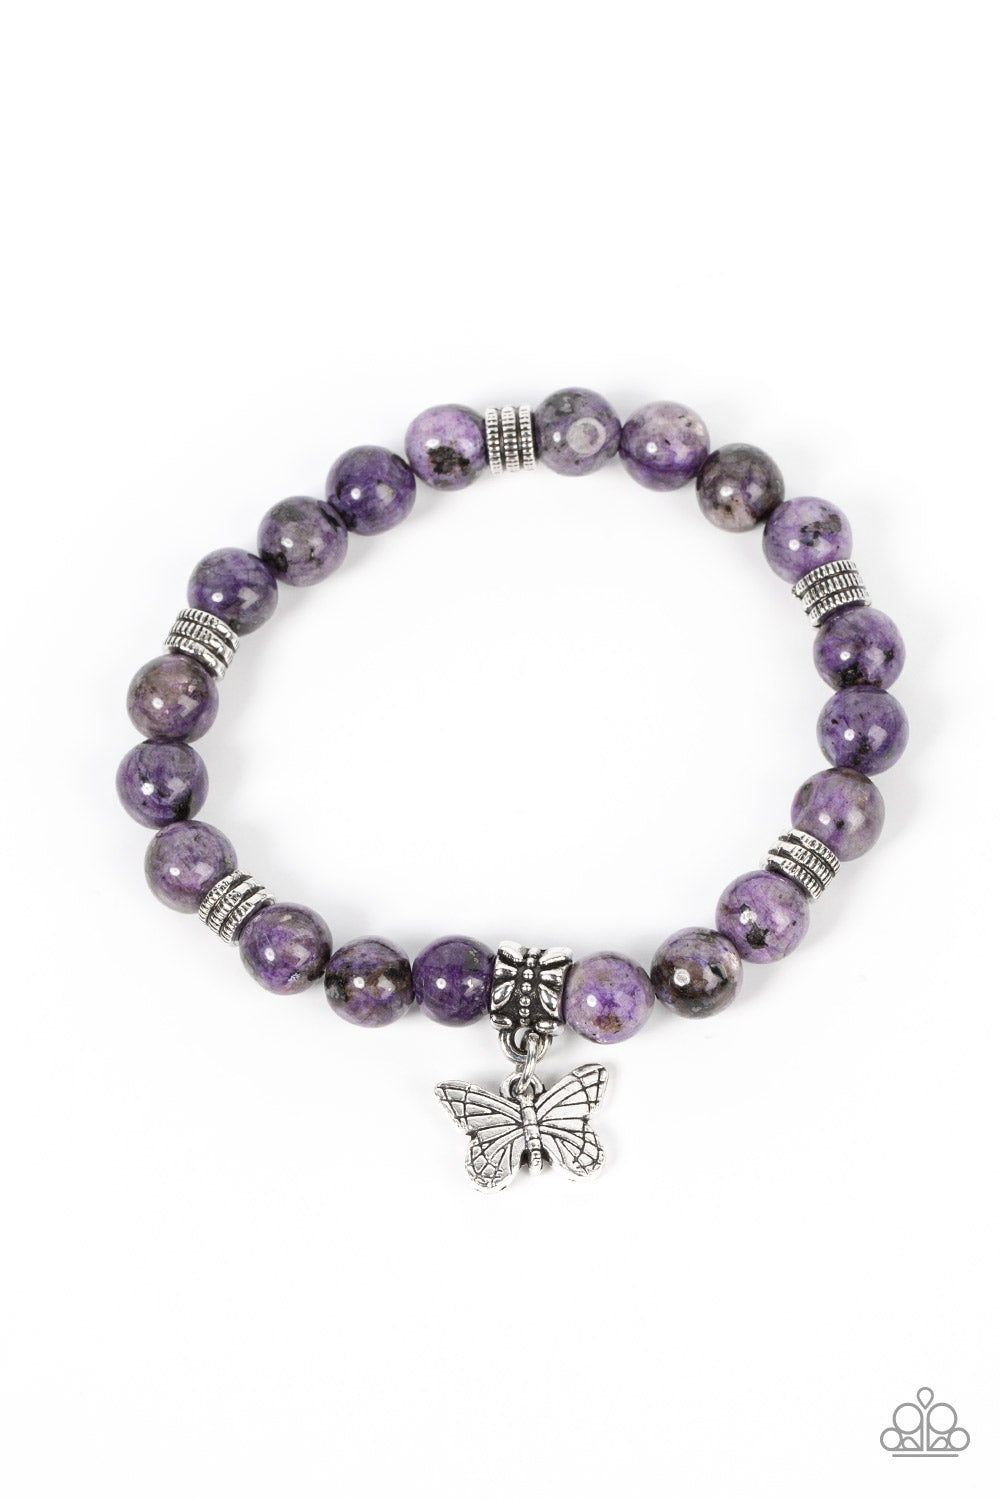 Butterfly Nirvana Purple Bracelet - Paparazzi Accessories  Infused with a silver butterfly charm, textured silver accents and amethyst stone beads are threaded along stretchy bands around the wrist for a whimsical look.  Sold as one individual bracelet.